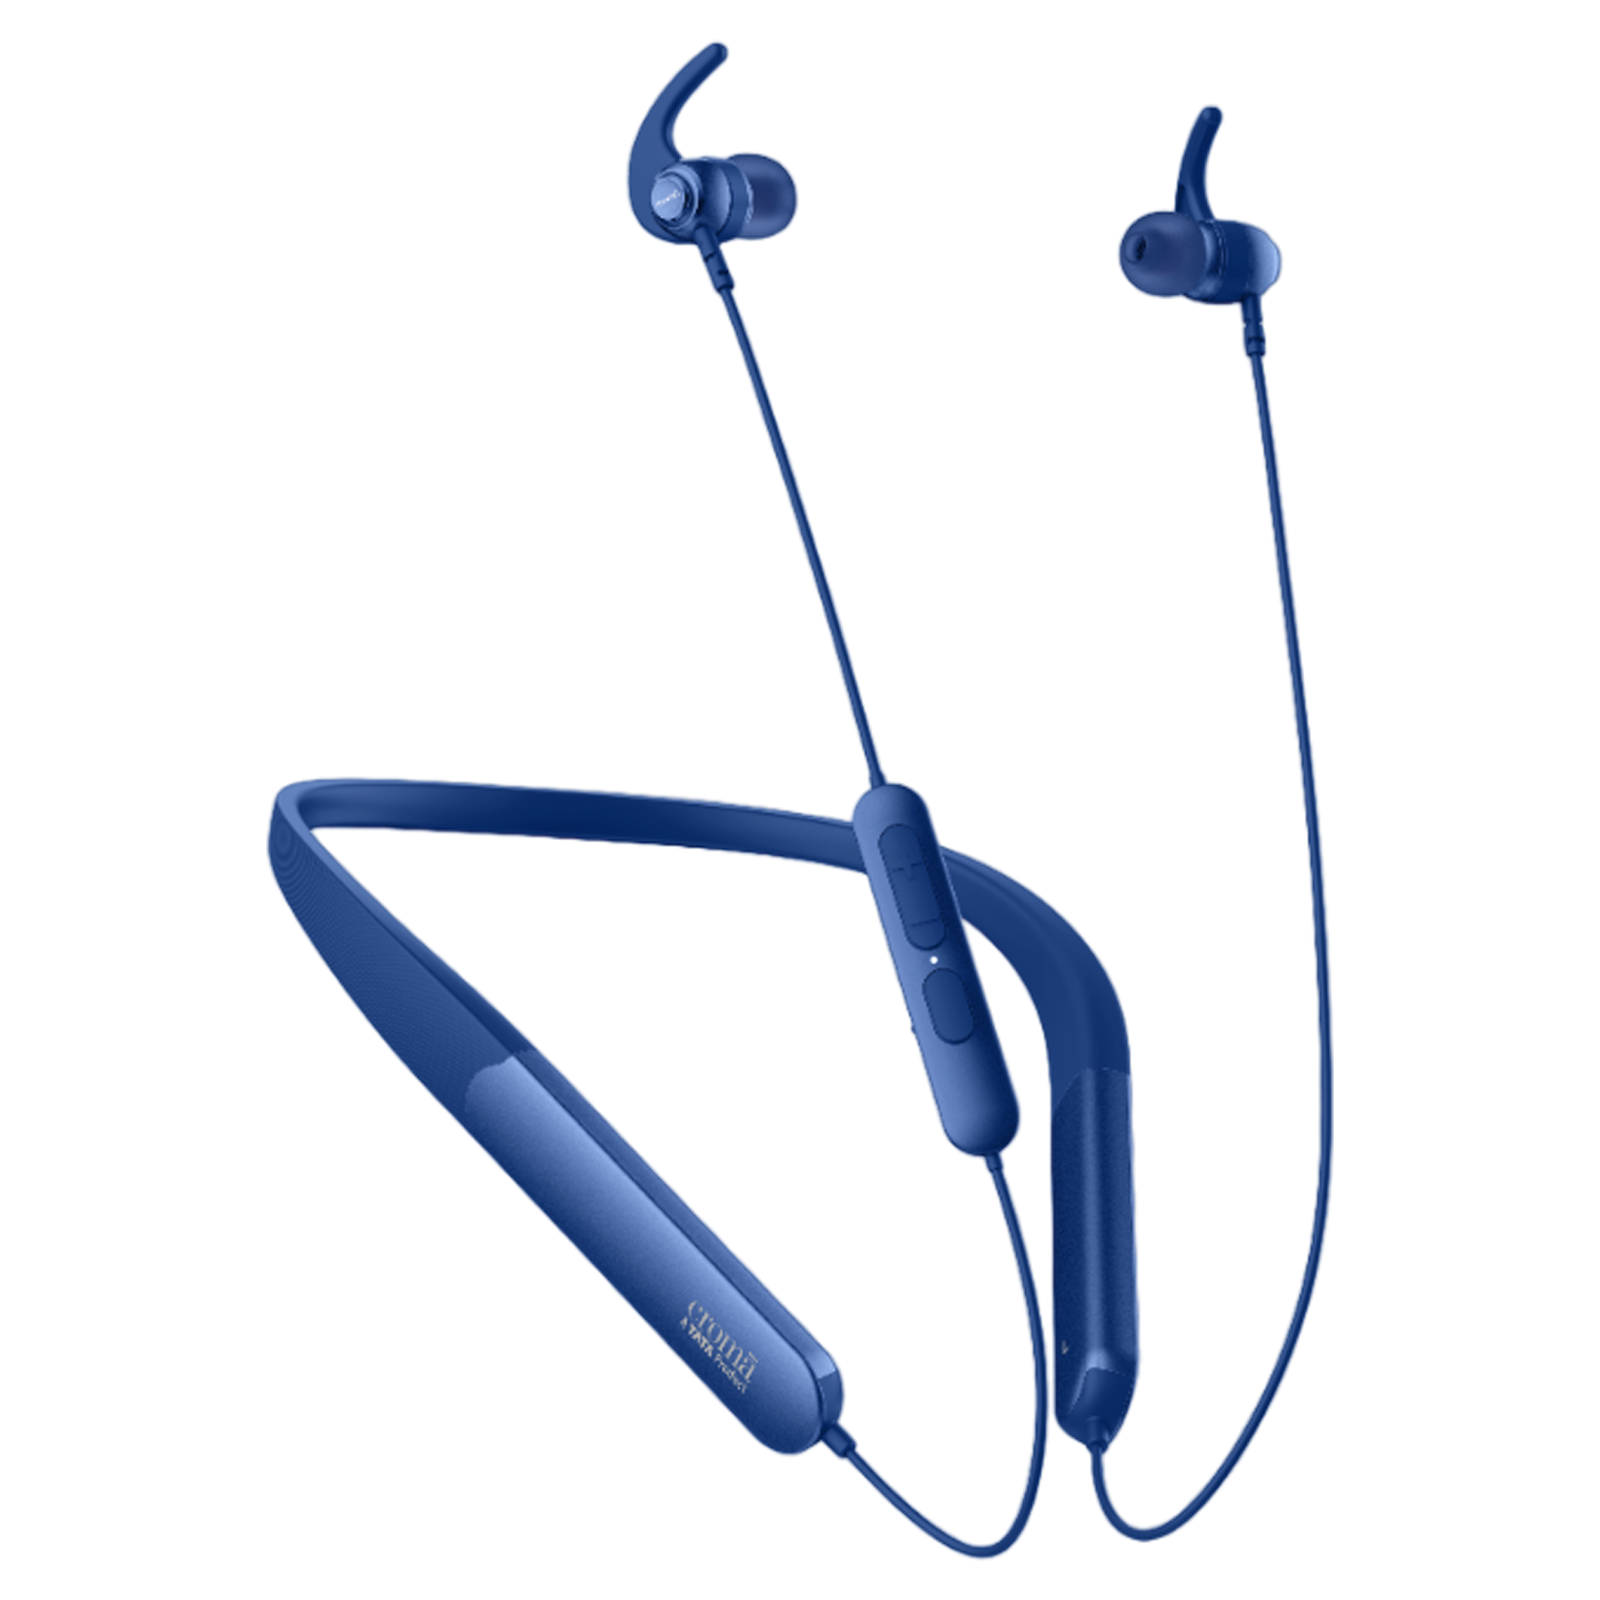 Croma CRSE150EPA301502BLU Neckband with Environmental Noise Cancellation (IPX4 Water Resistant, Dual Device Pairing, Blue)